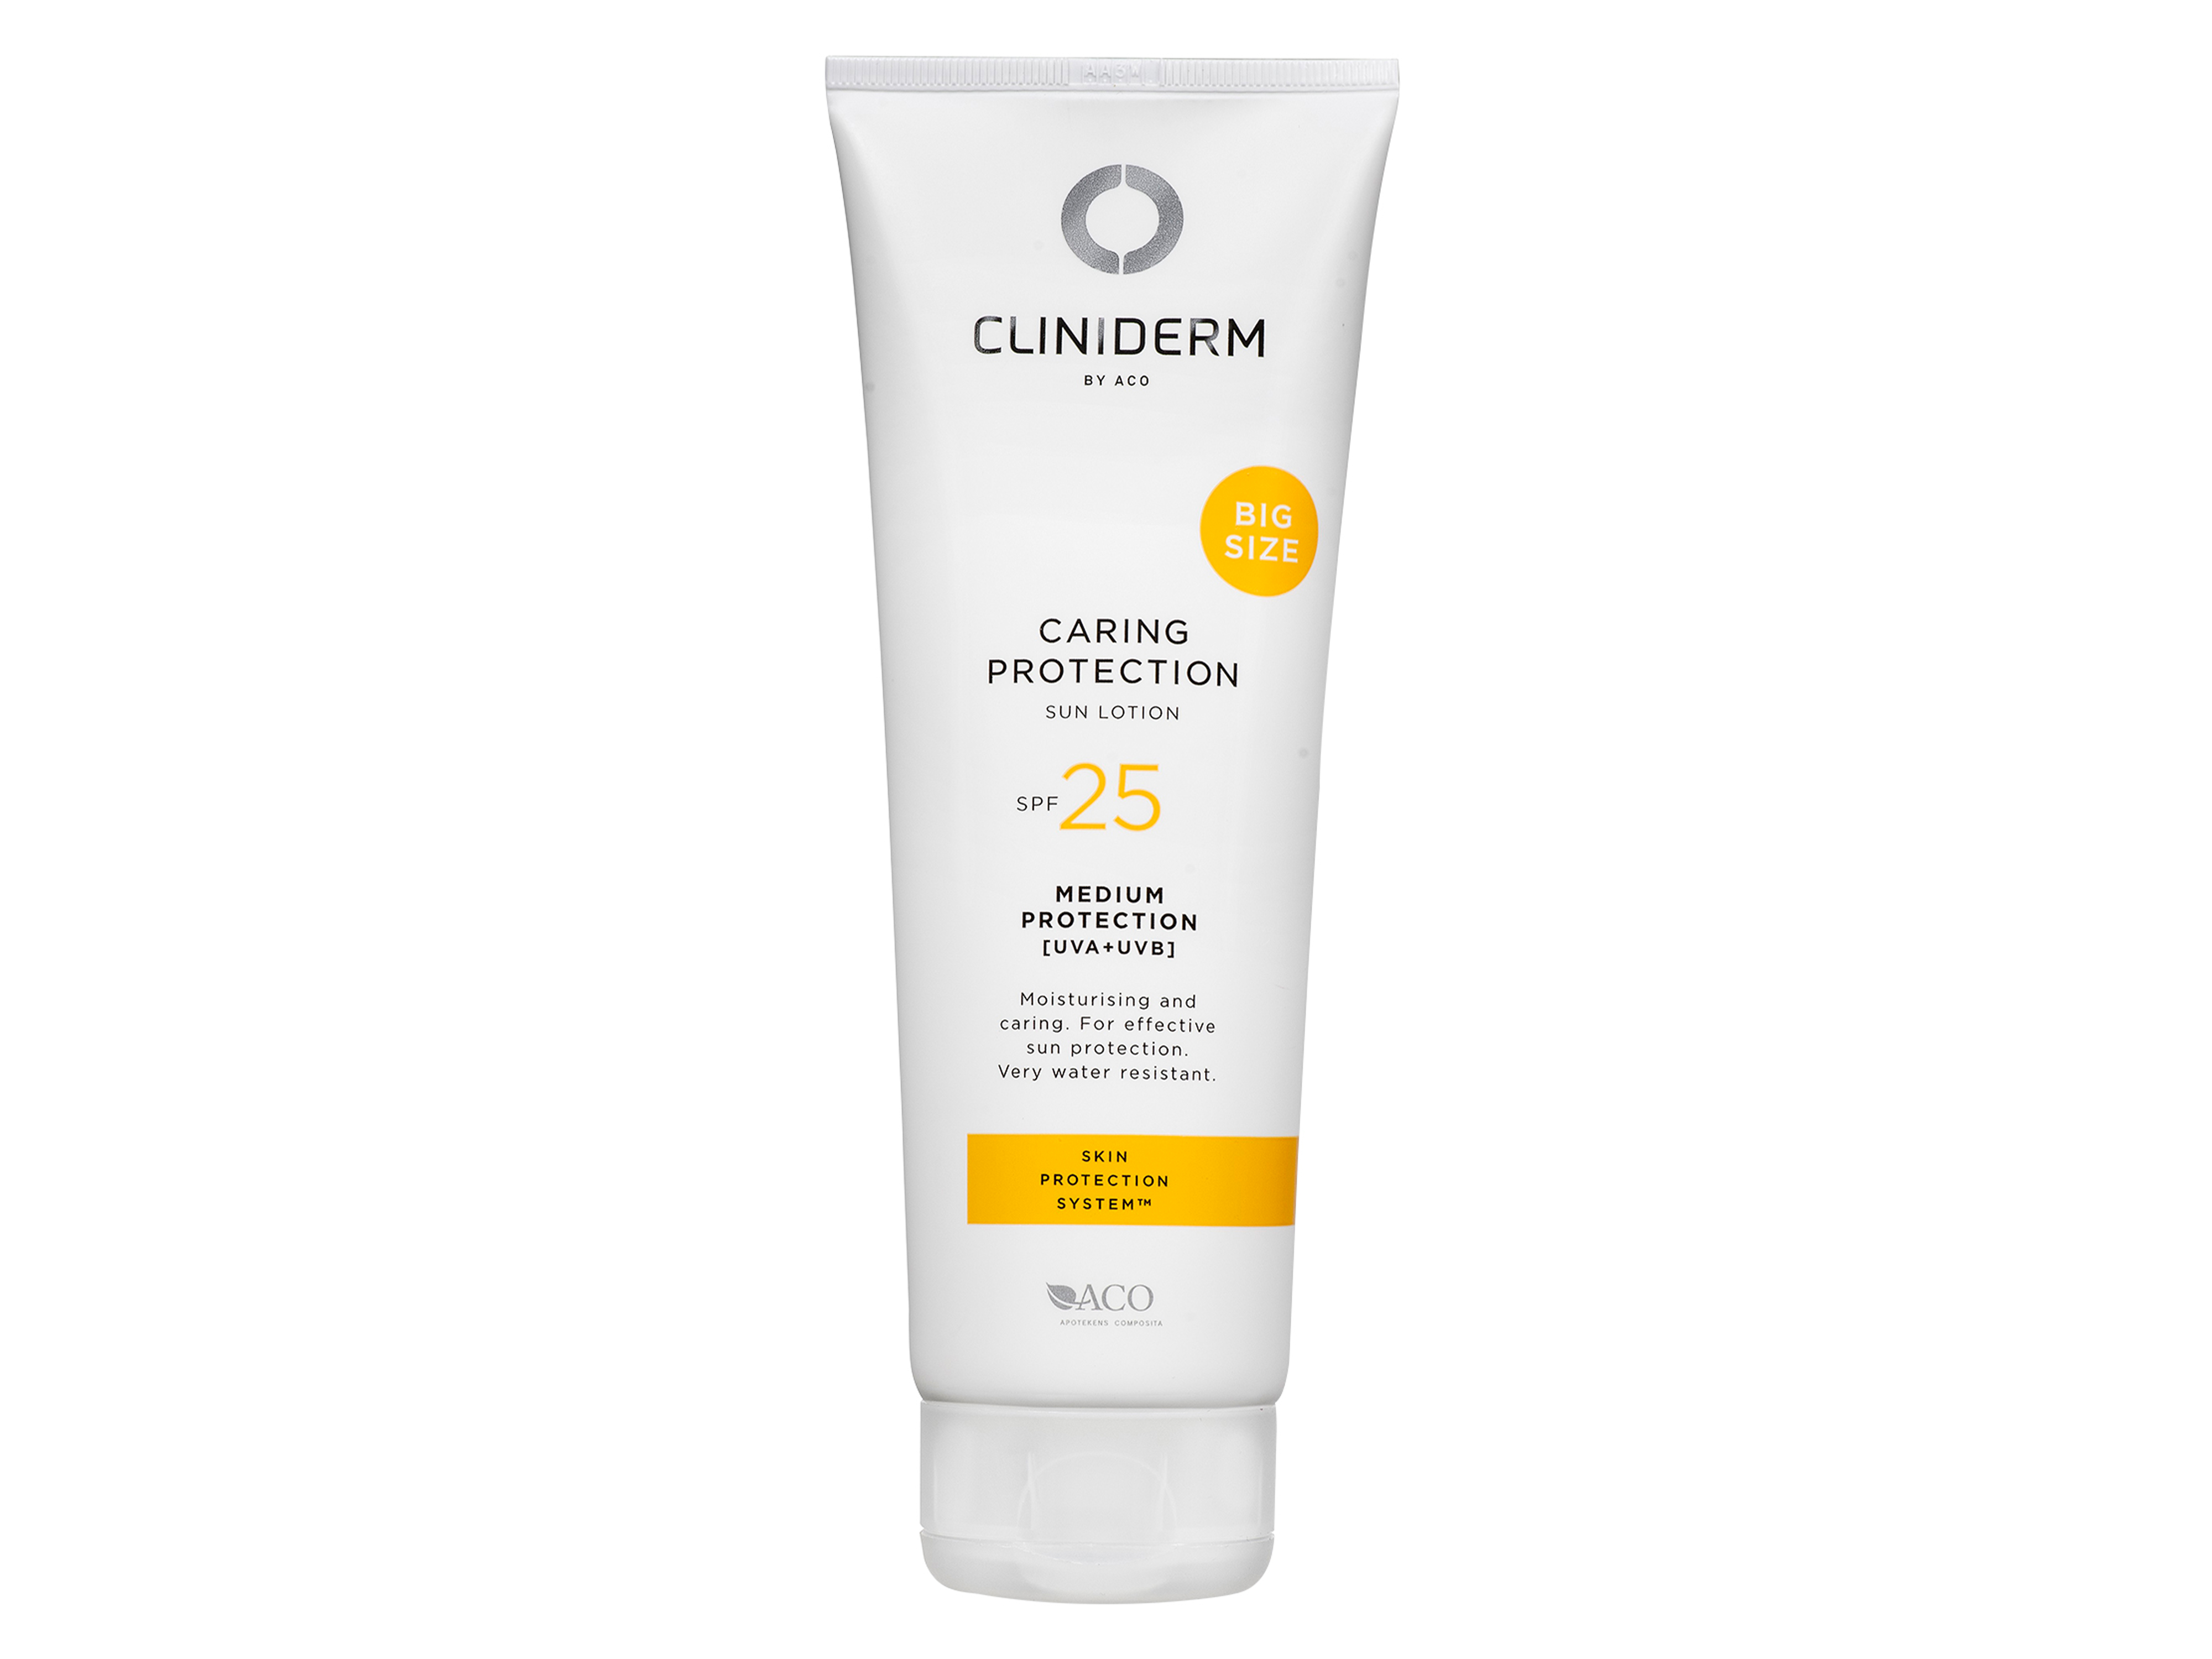 Cliniderm Caring Protection Sun Lotion SPF25, 250 ml